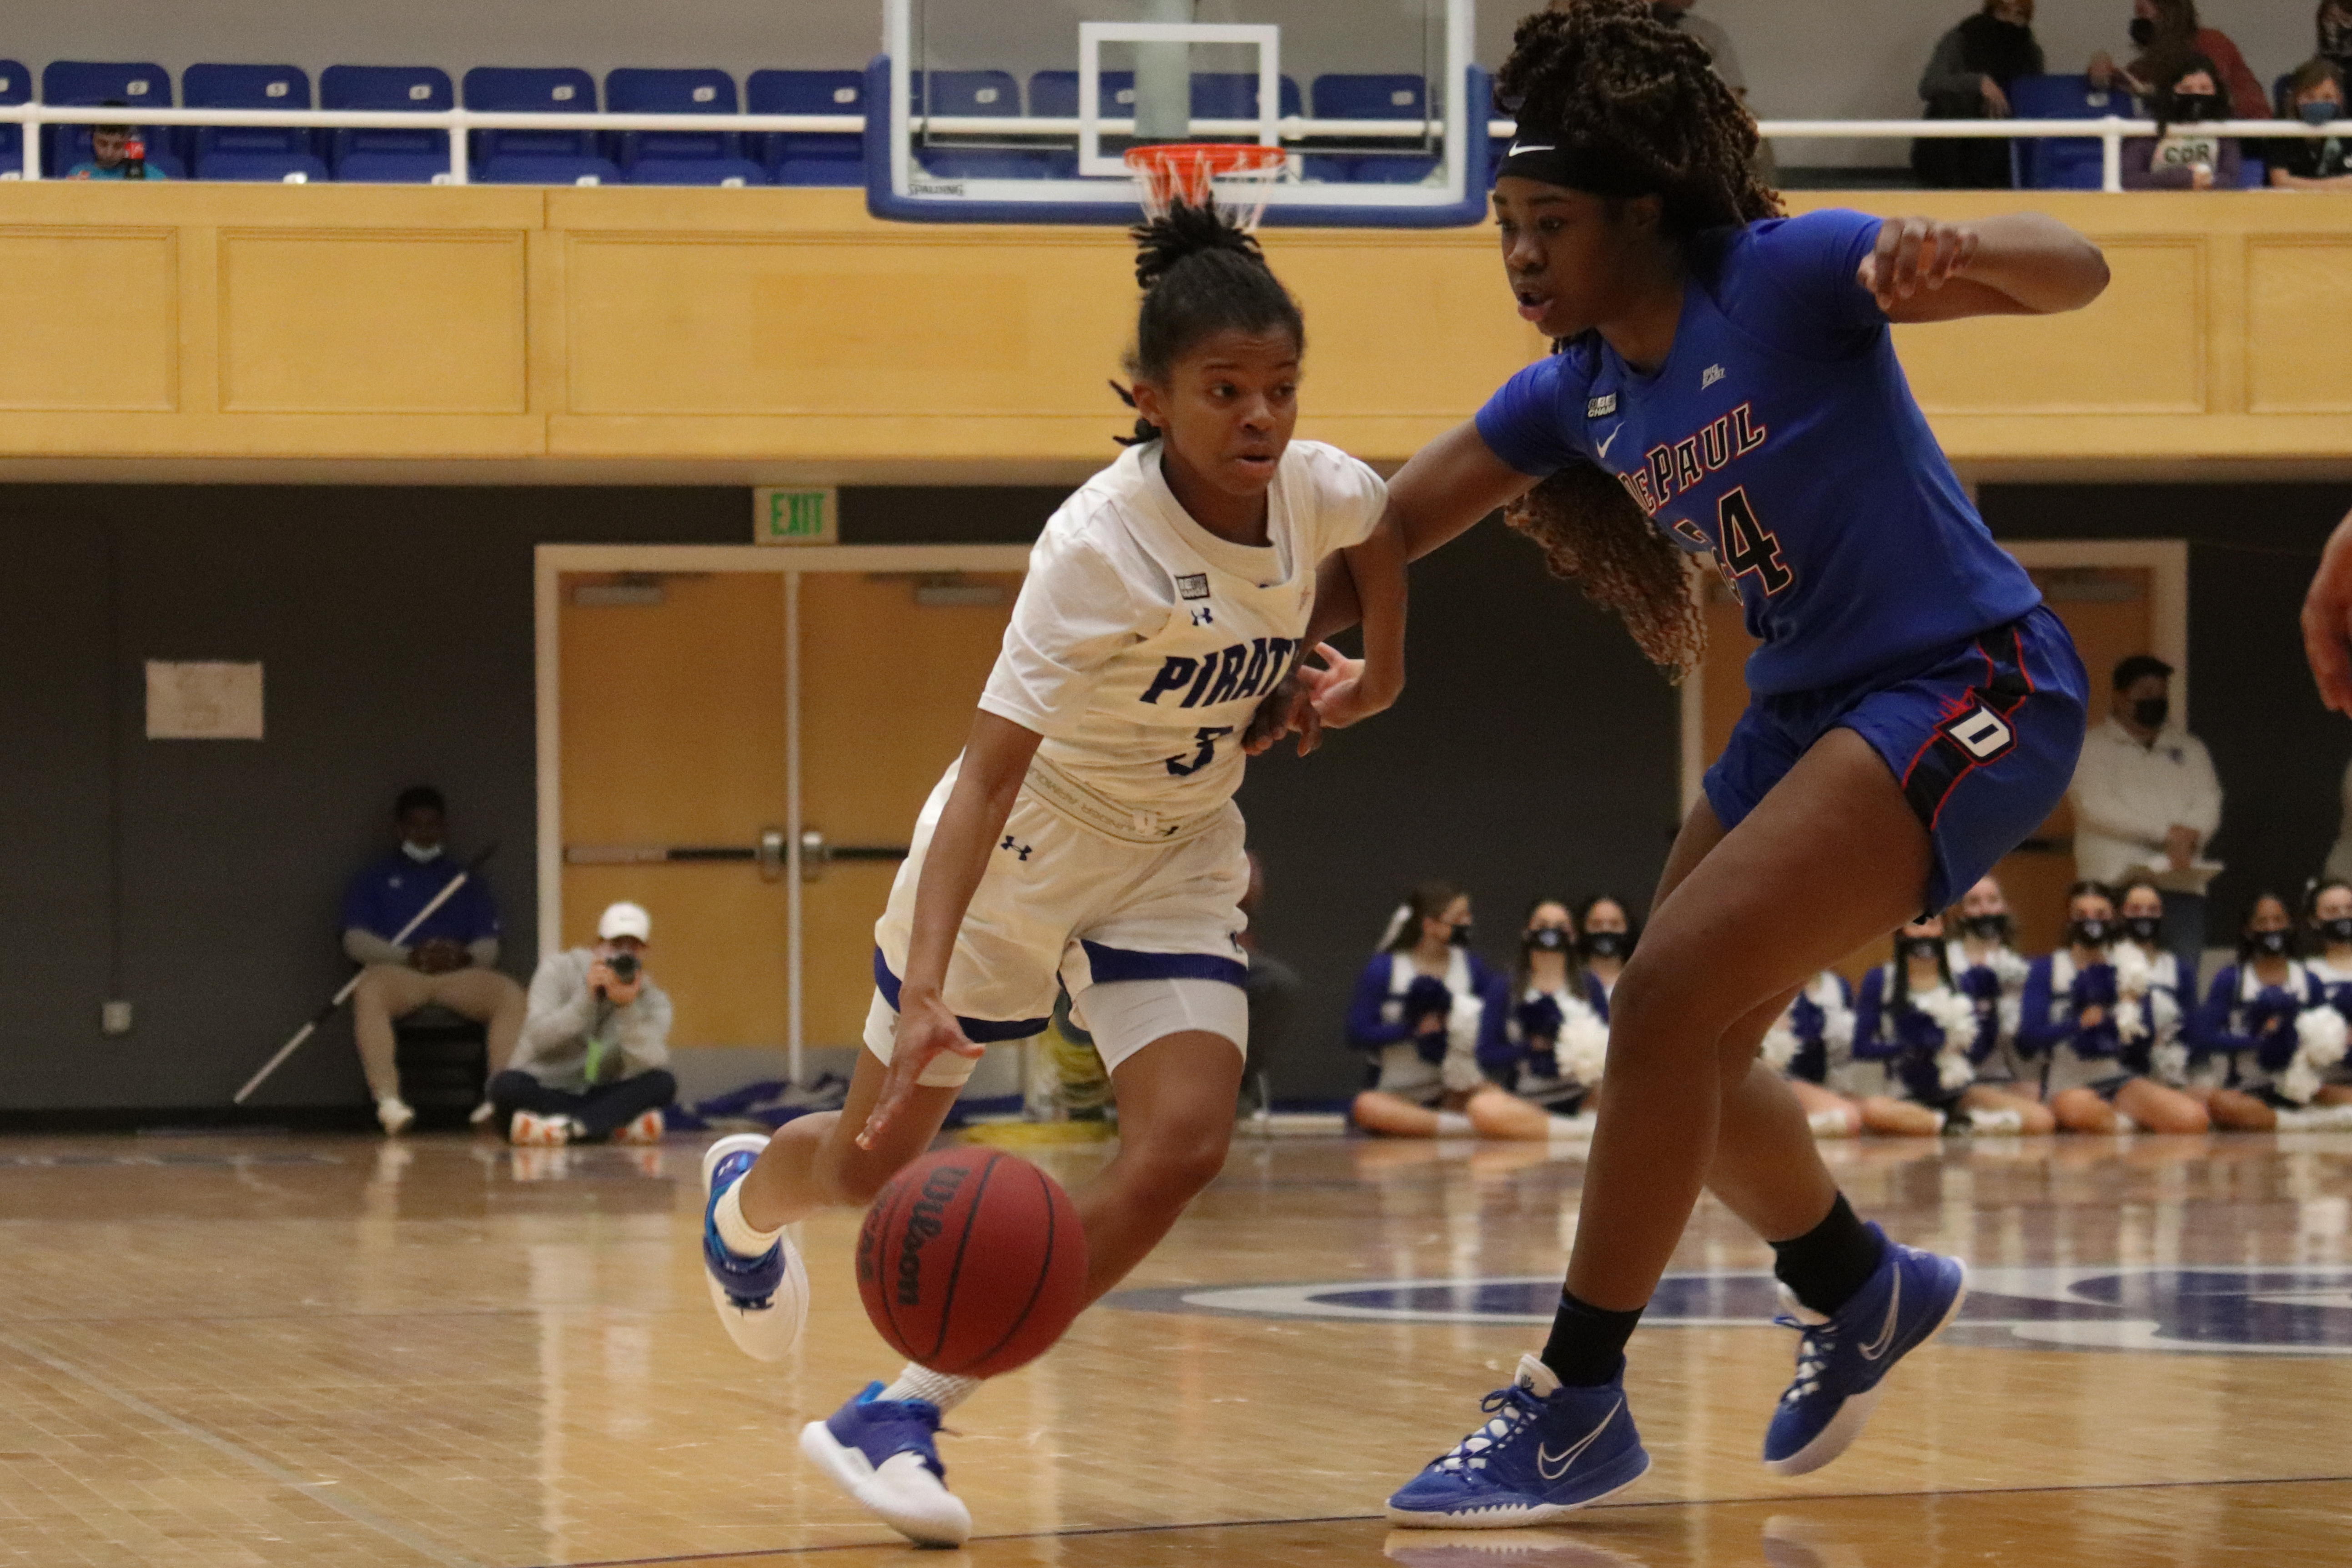 Seton Hall's Lauren Park-Lane drives to the basket during a home game vs. DePaul.